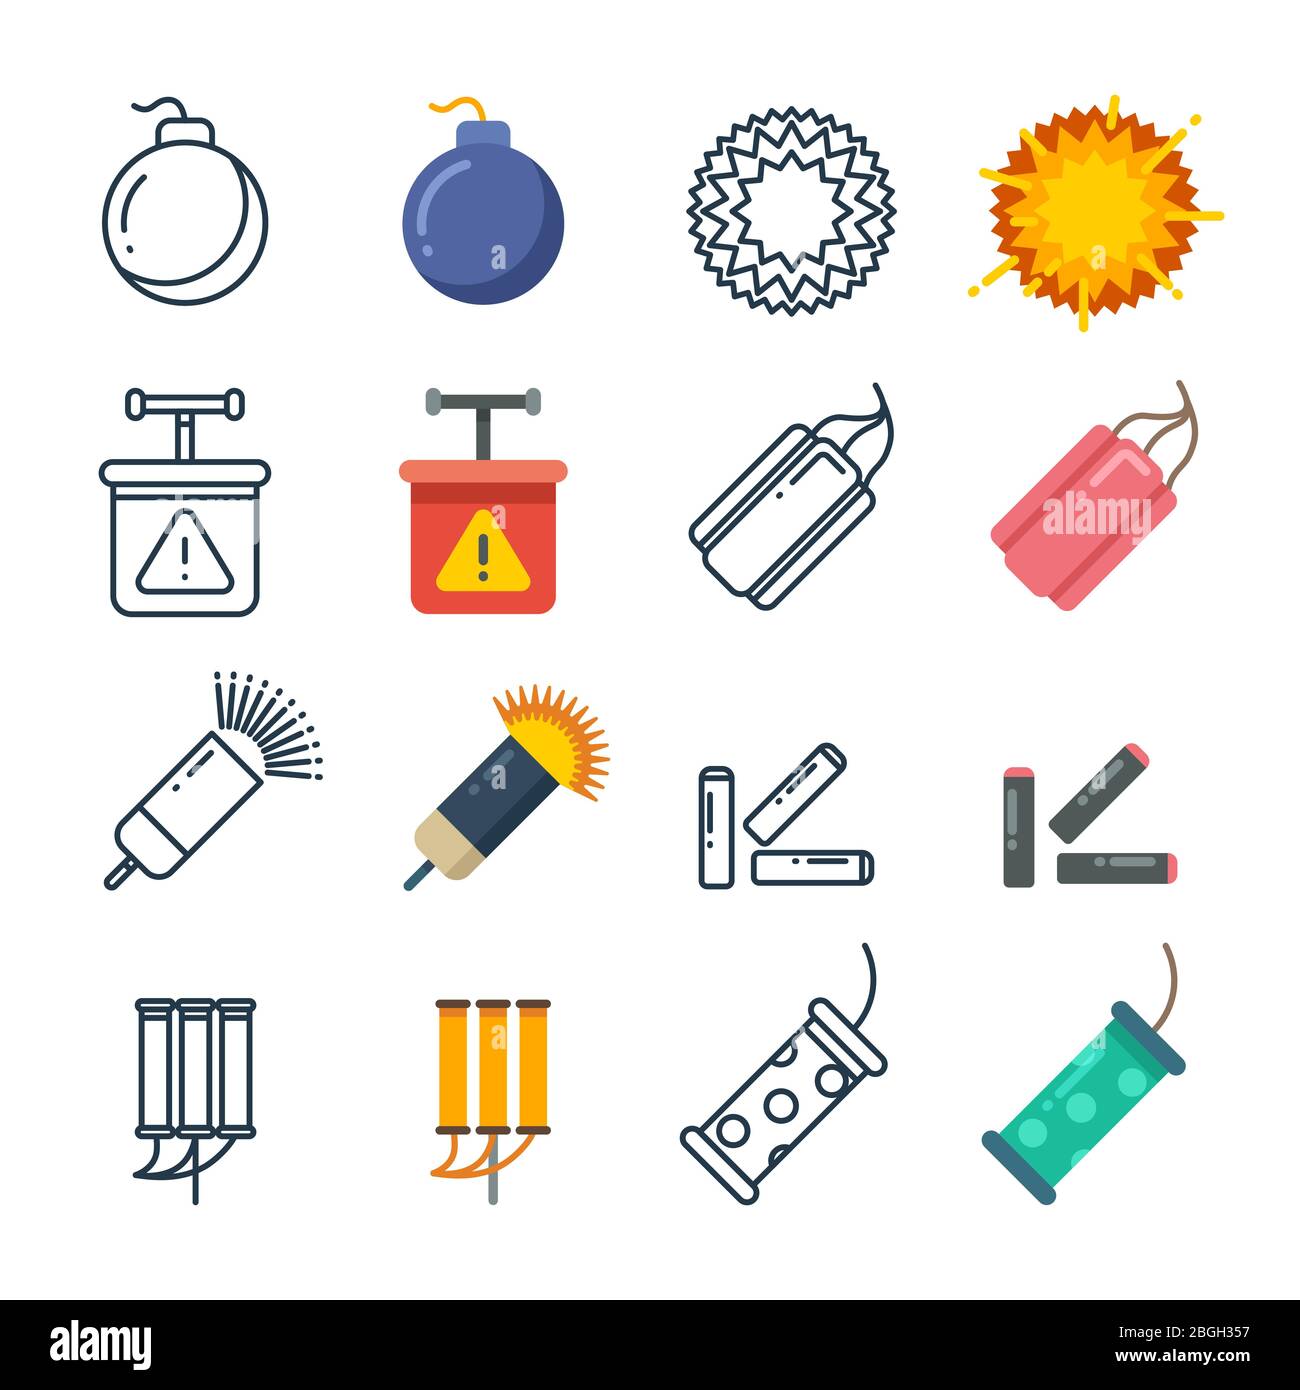 Dynamite, fireworks, pyrotechnic vector icons colored of set. Vector illustration Stock Vector